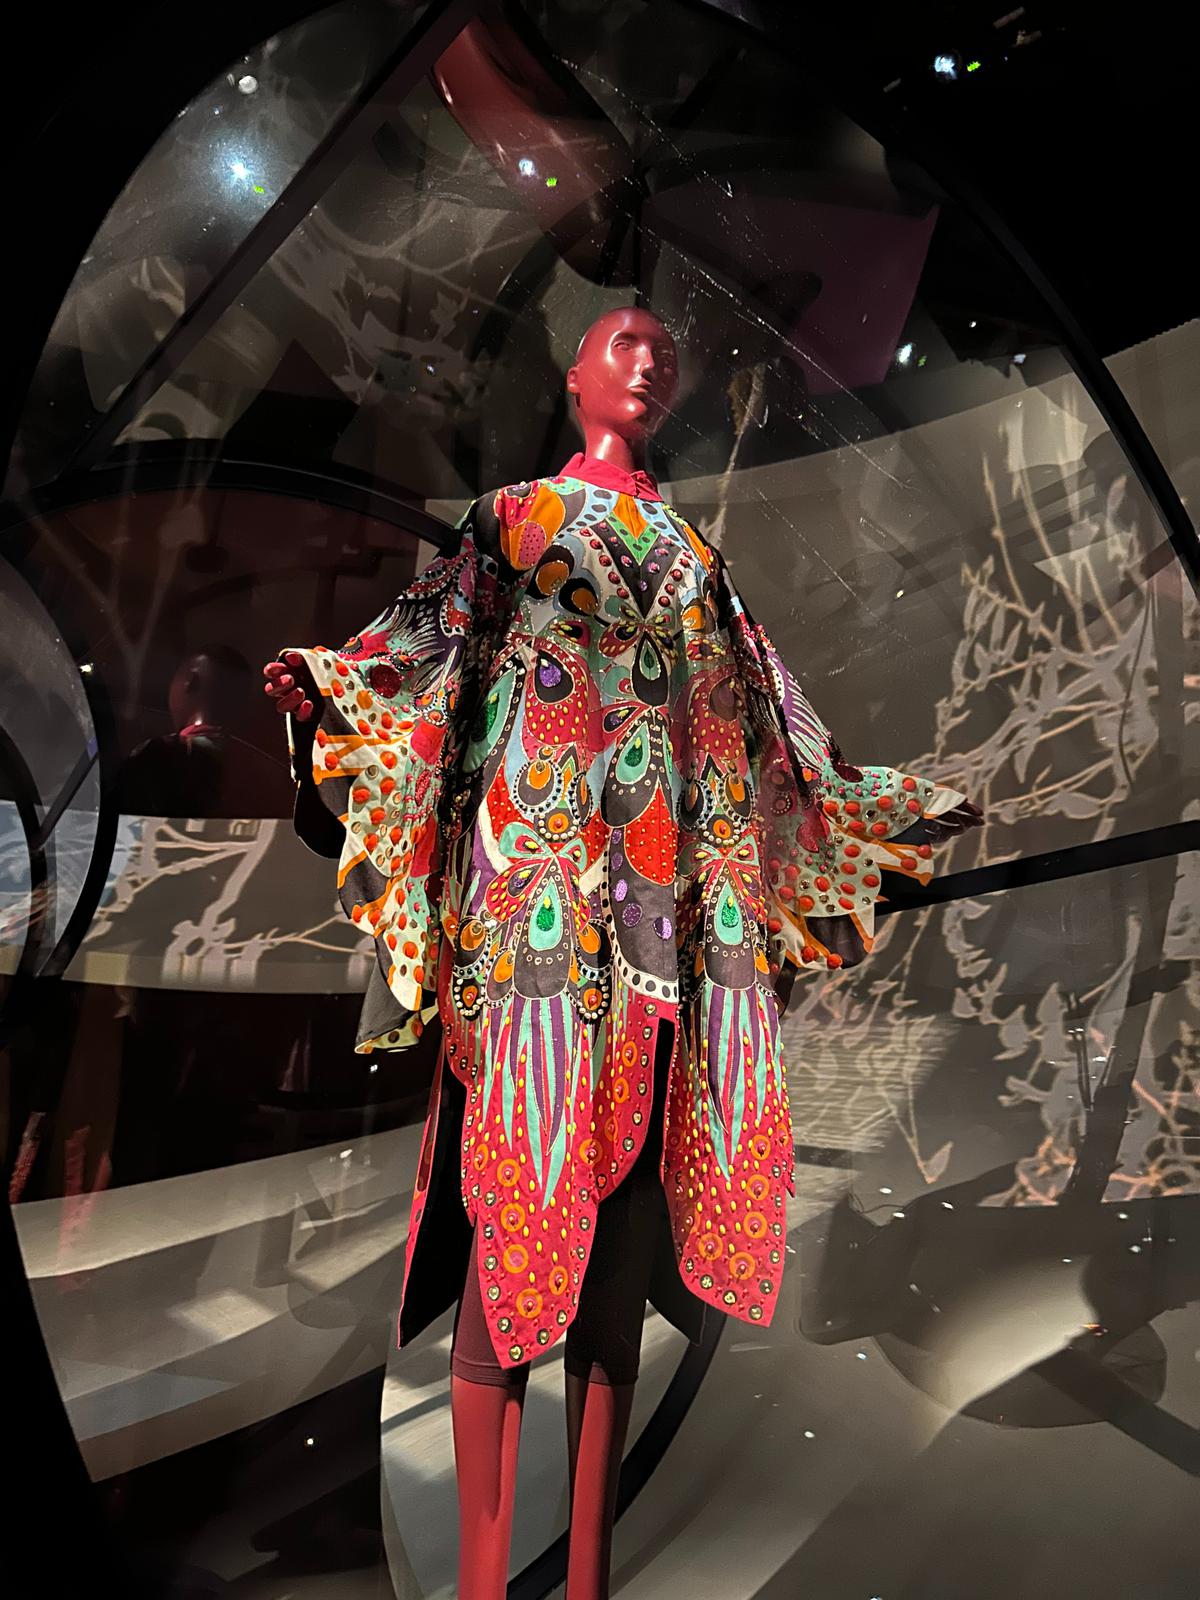 A Manish Arora outfit